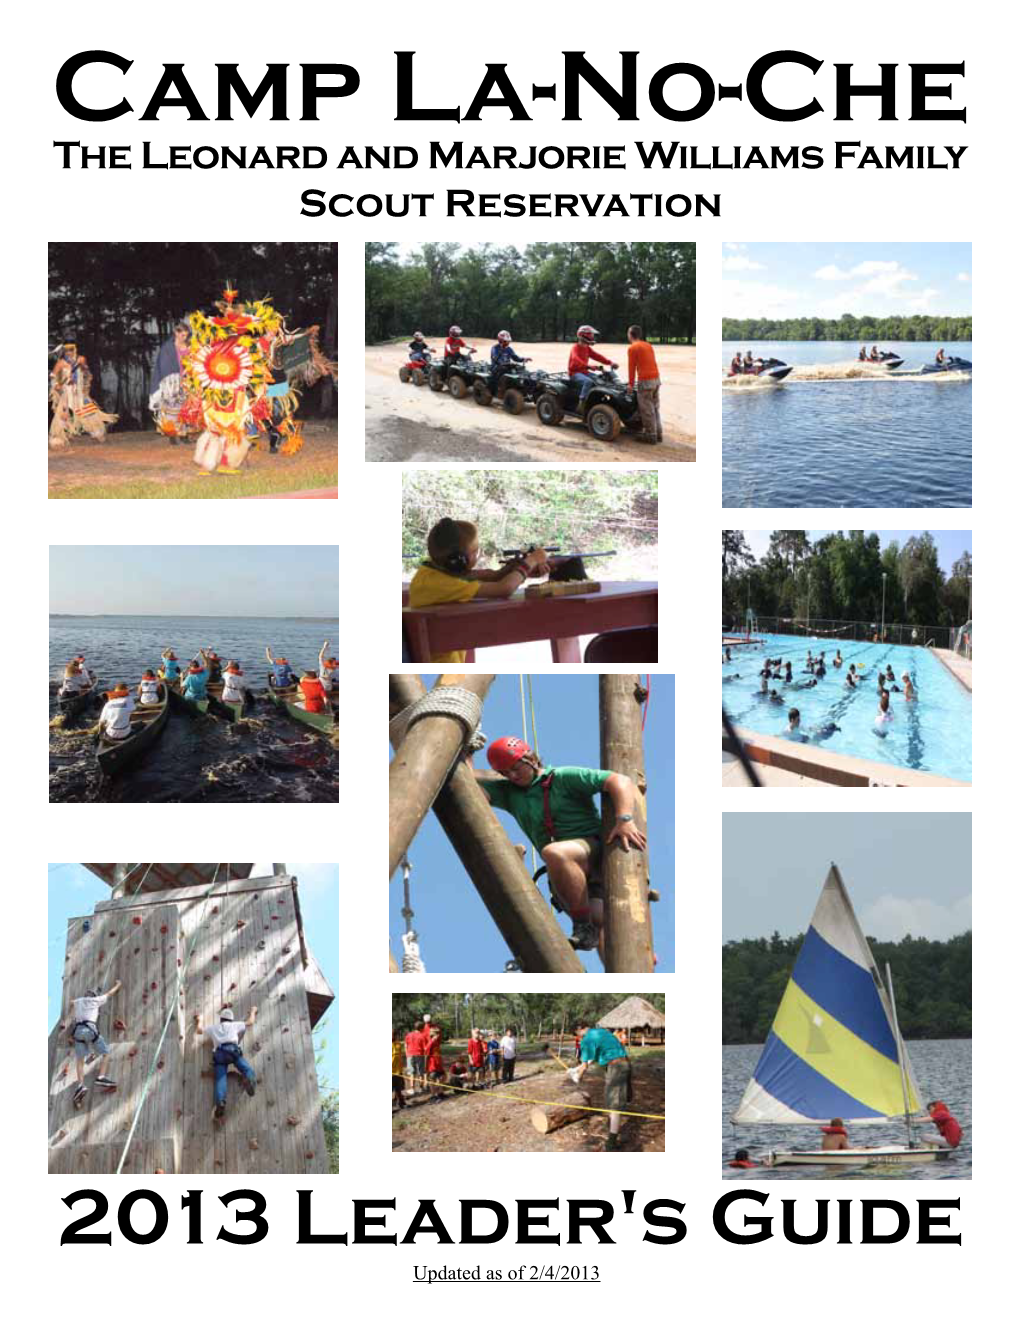 Camp La-No-Che the Leonard and Marjorie Williams Family Scout Reservation